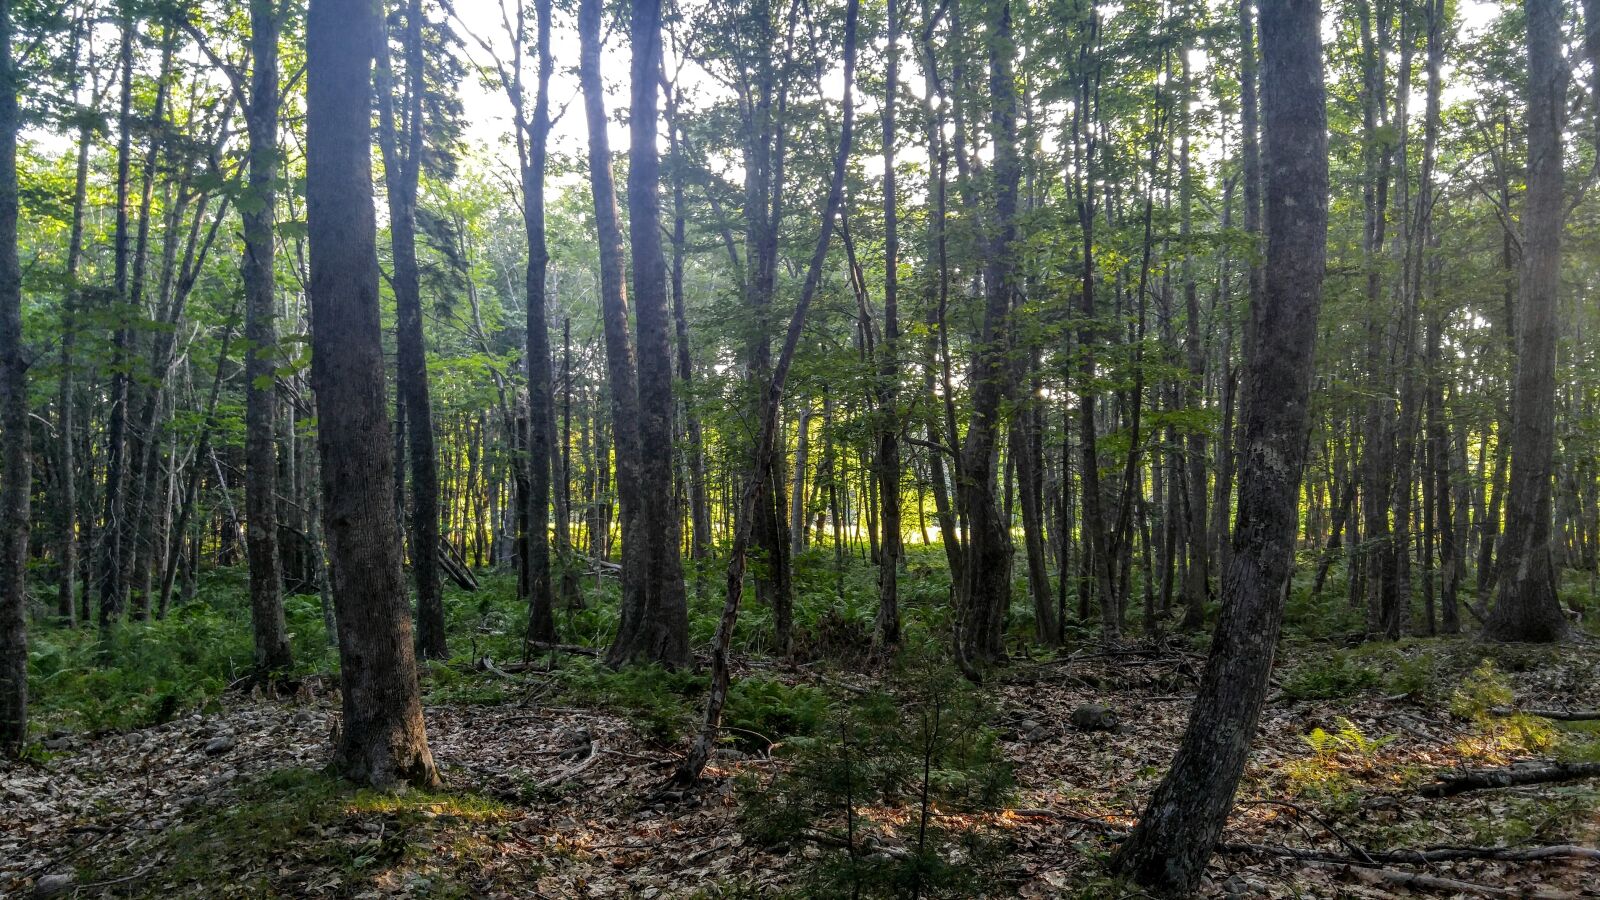 LG V10 sample photo. Nature, maine forest, forest photography